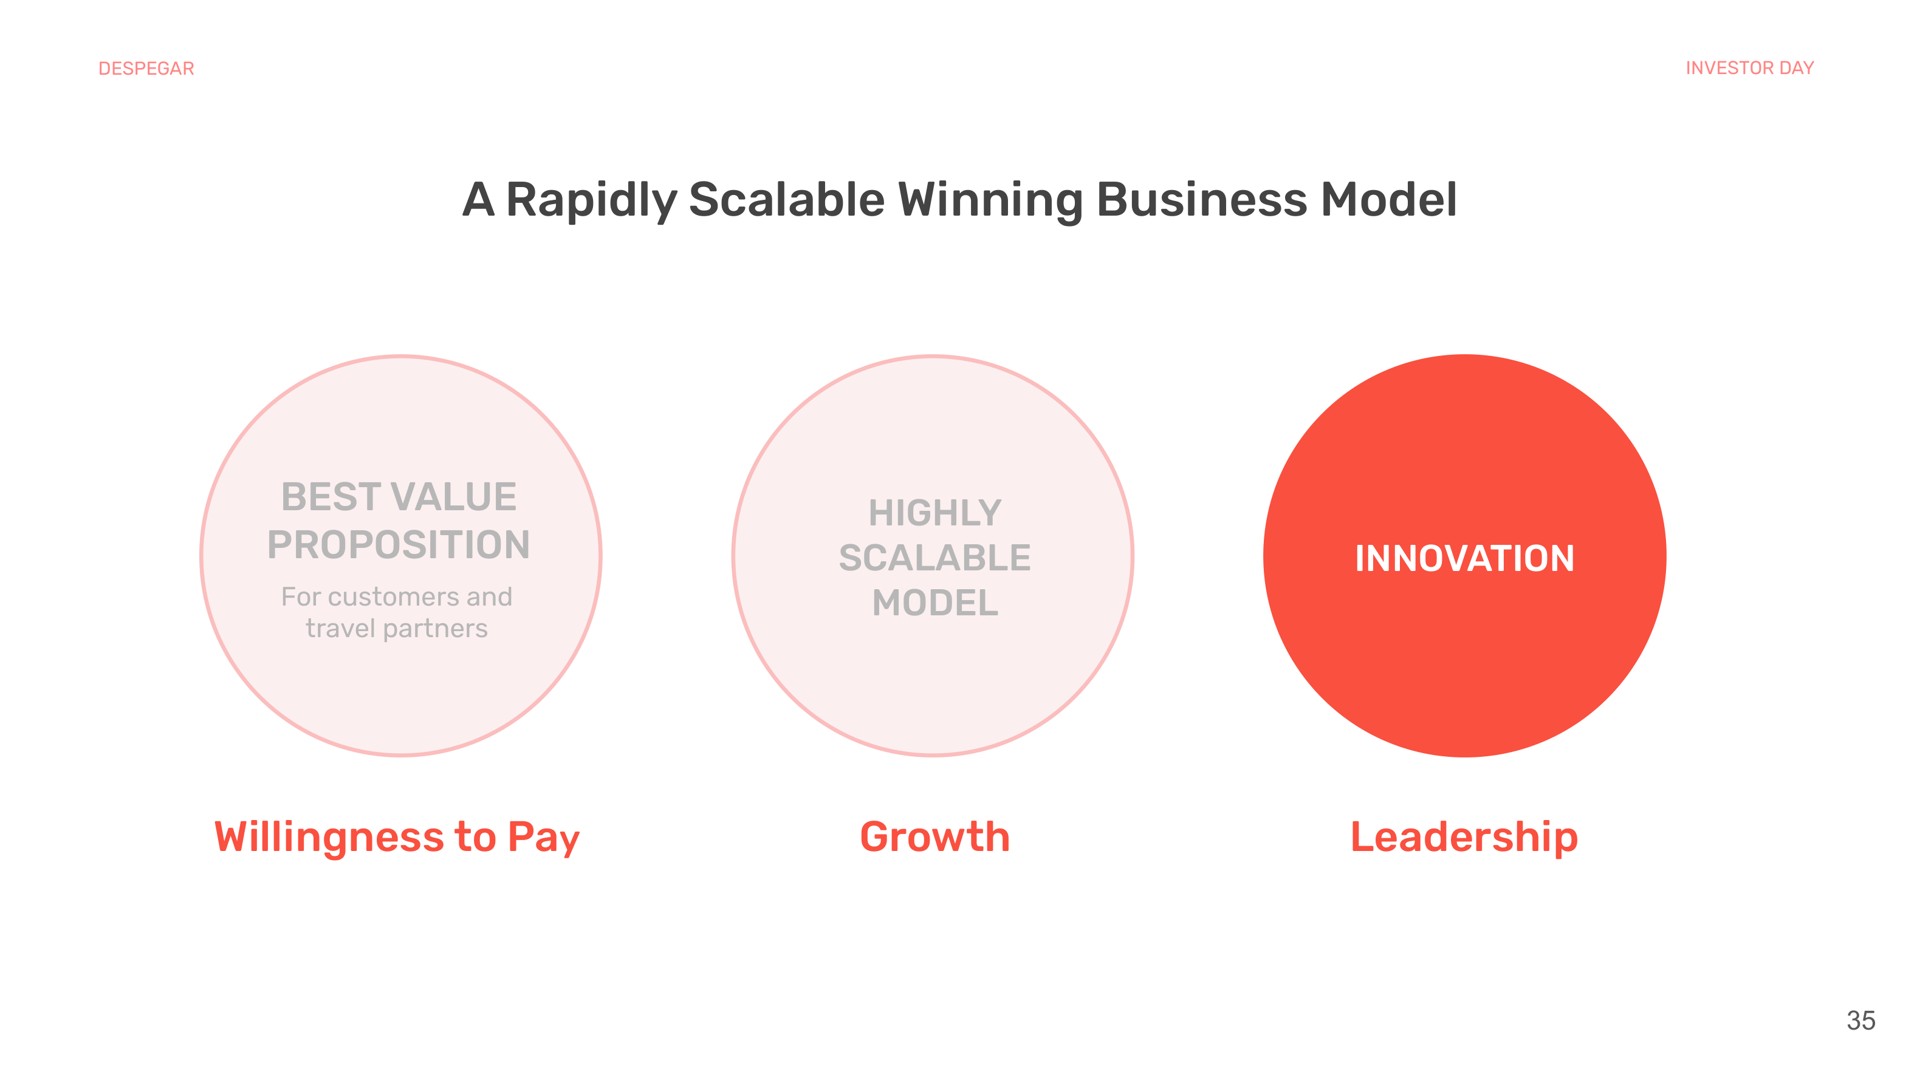 a rapidly scalable winning business model best value proposition for customers and travel partners highly scalable model innovation willingness to pay growth leadership | Despegar